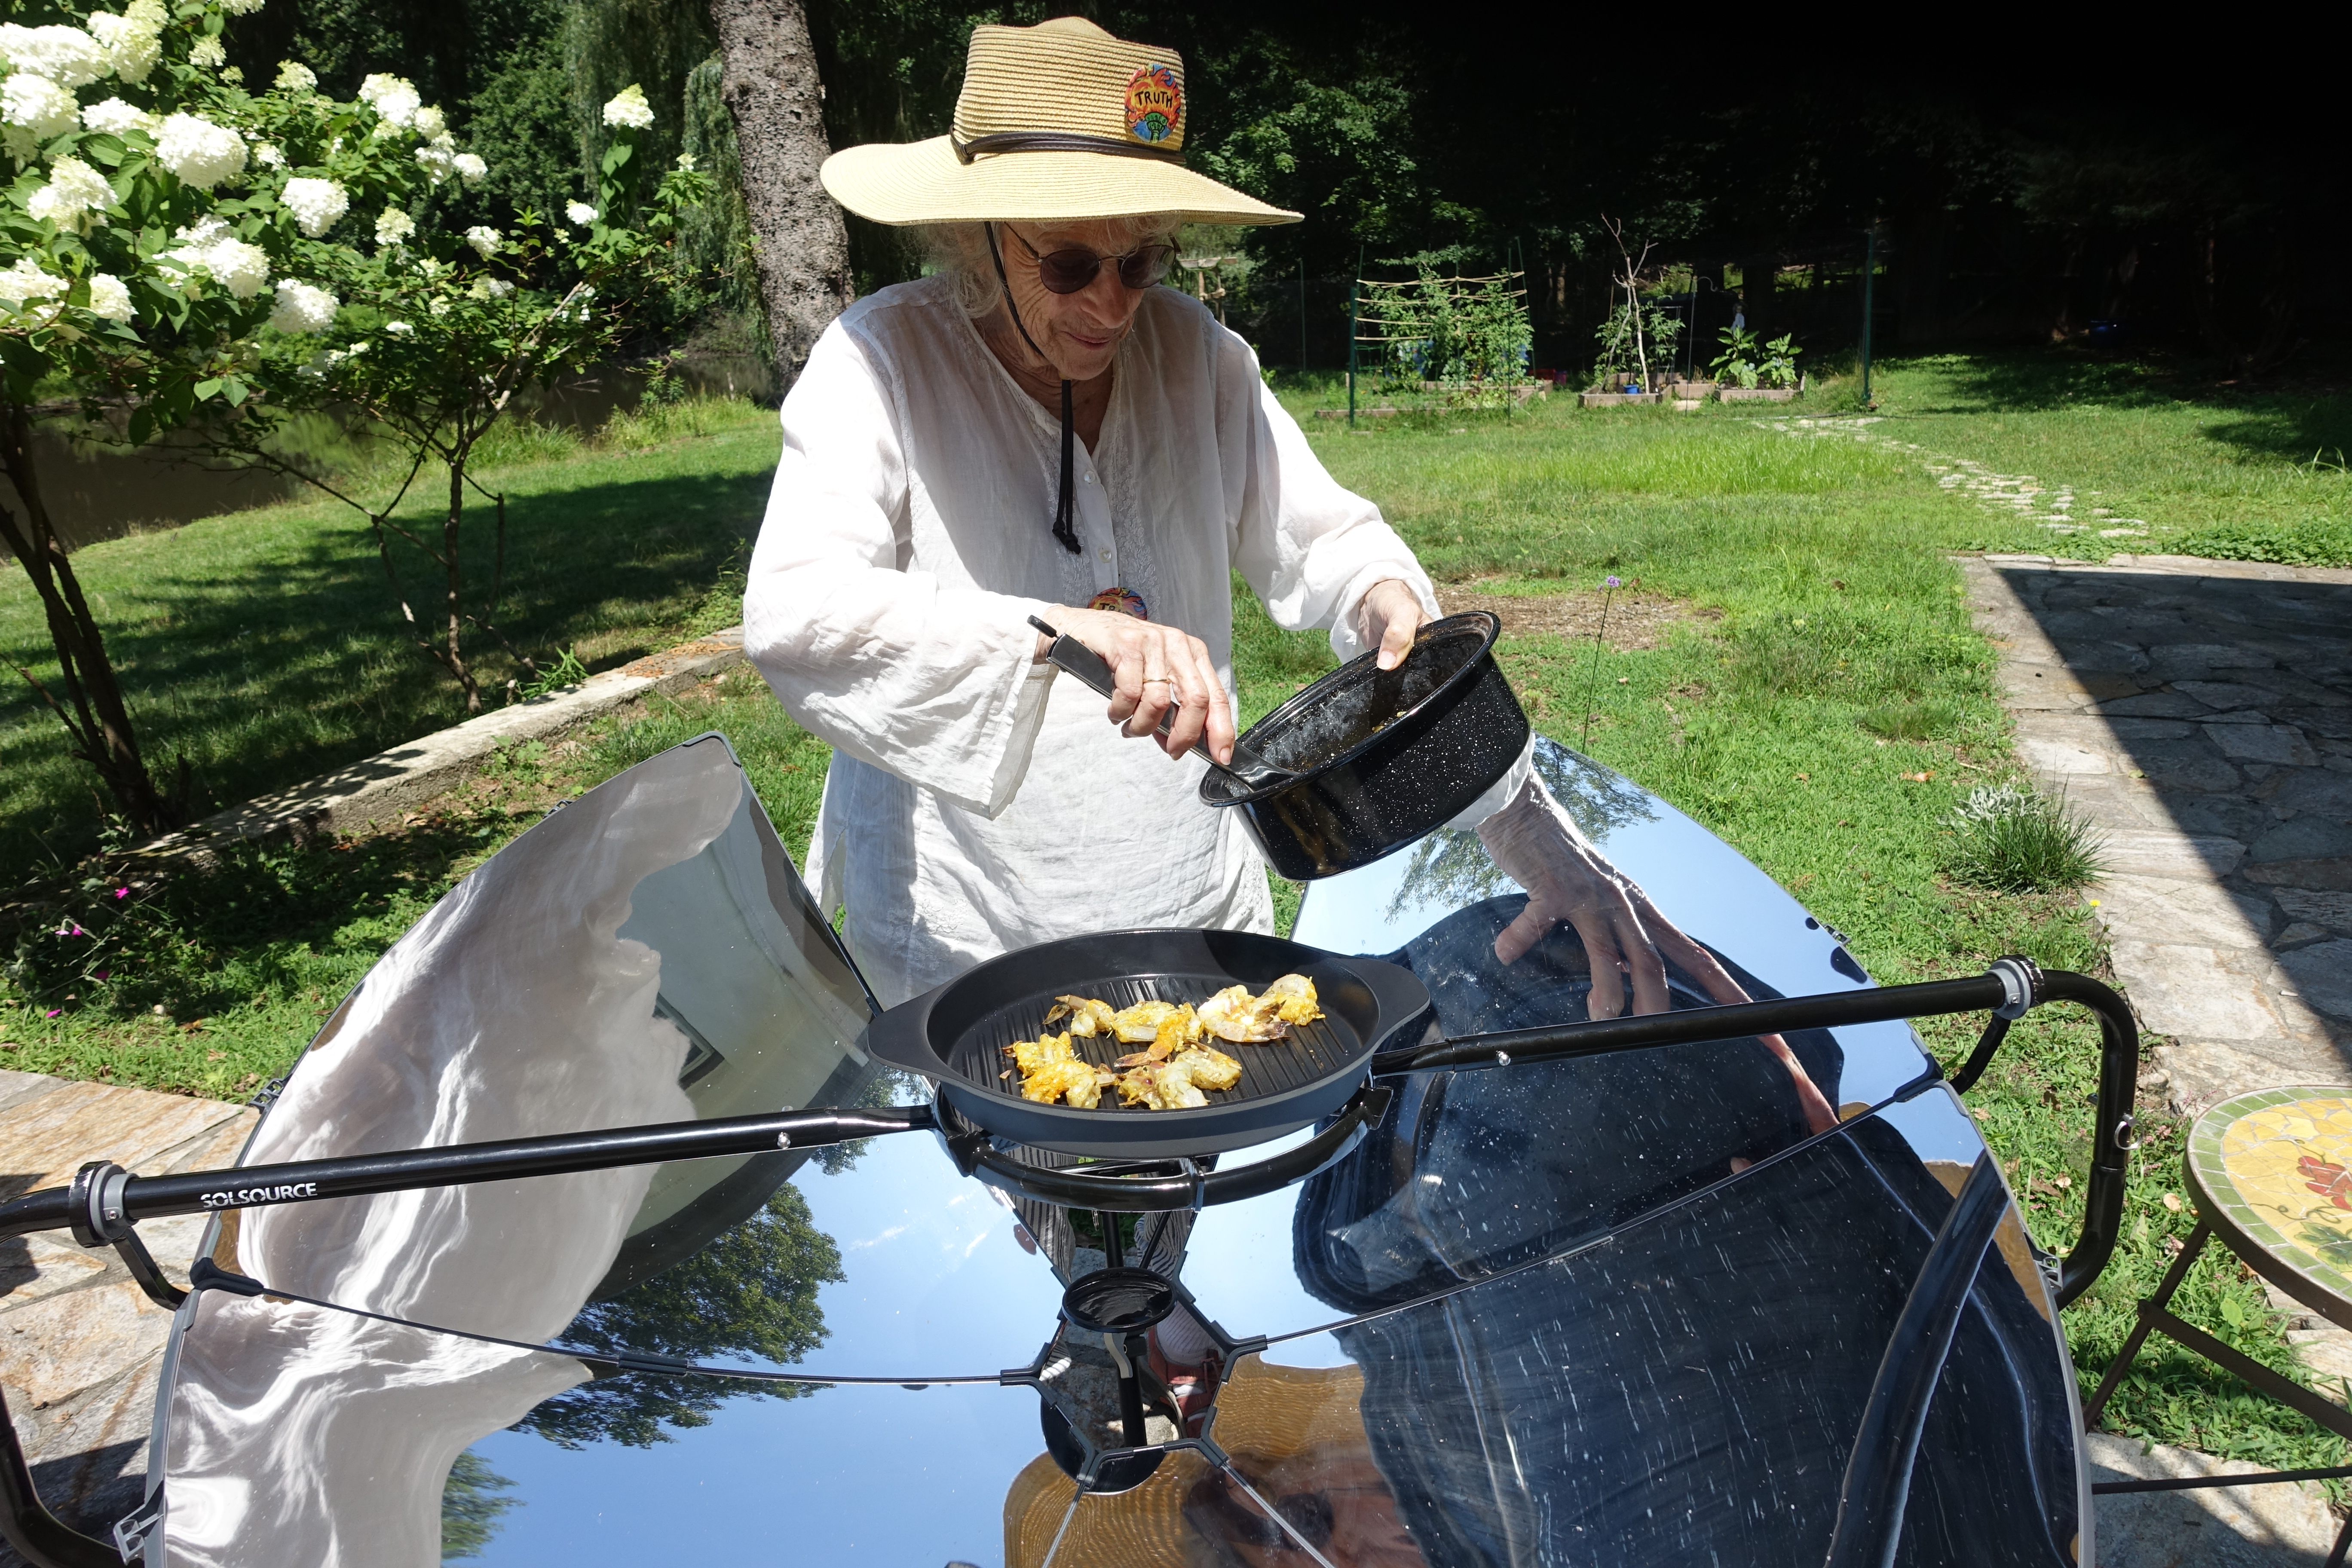 Mary Frank, SCI supporter and solar cooking advocate